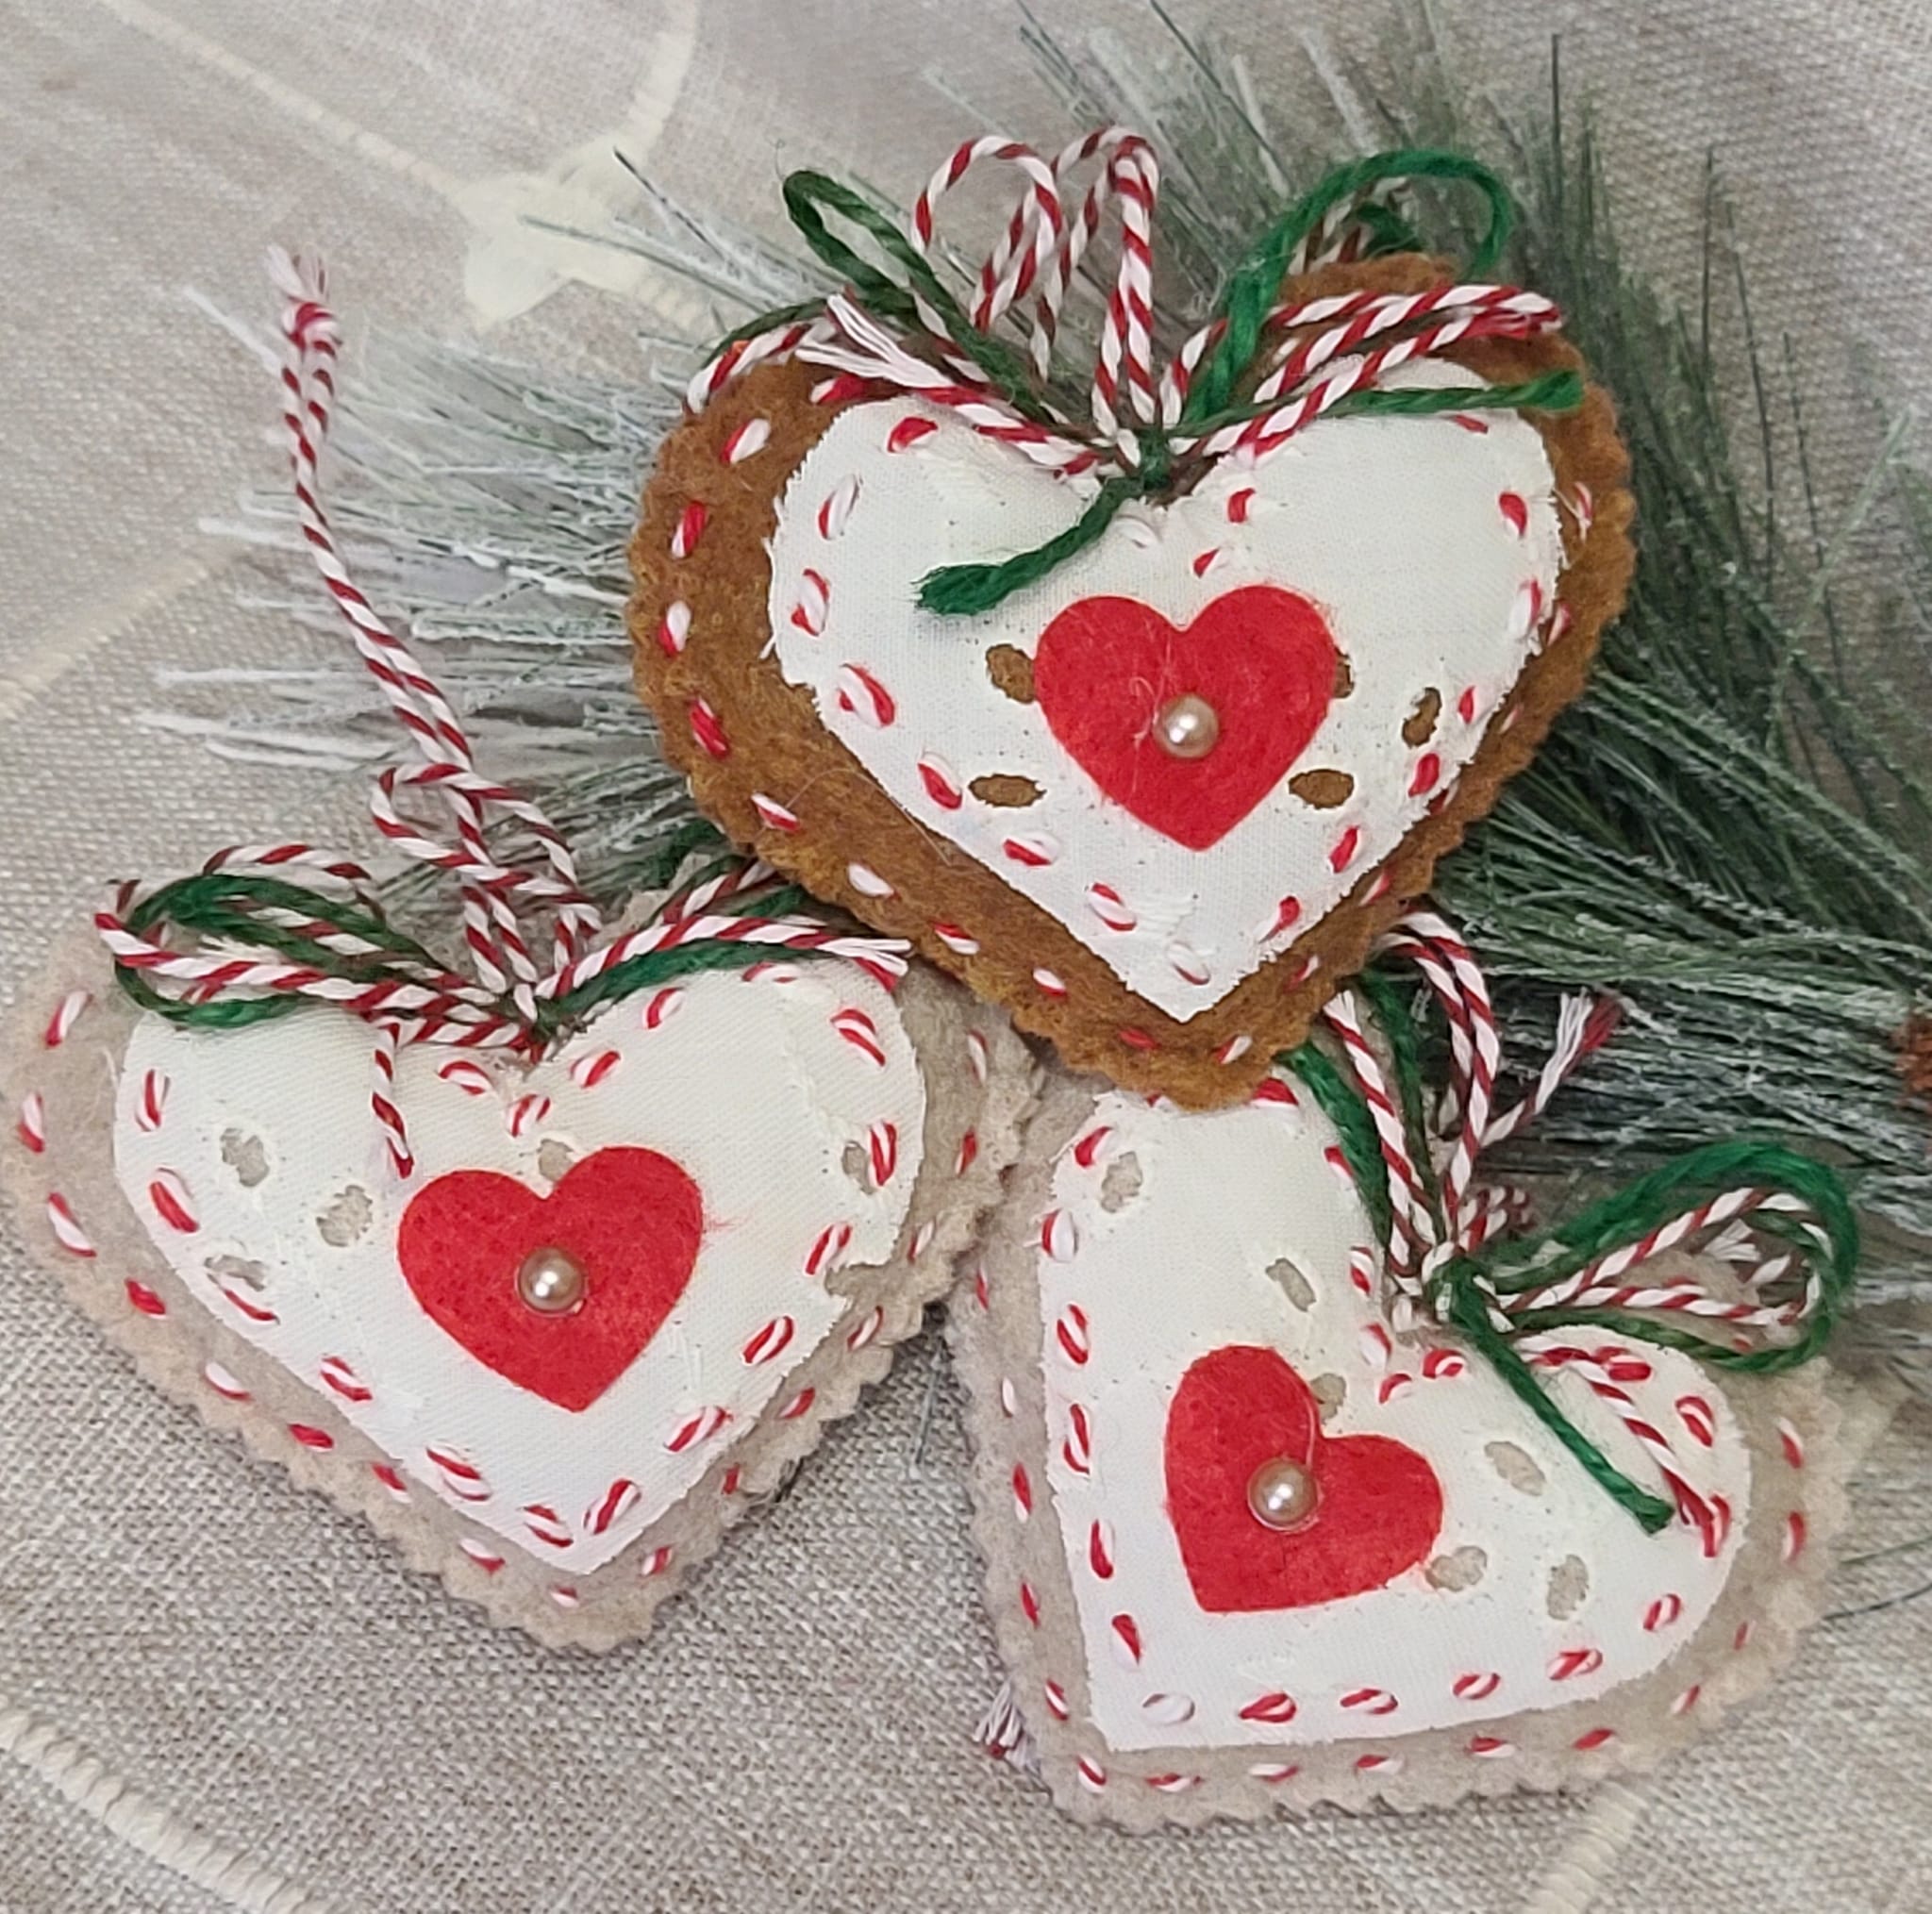 Cookie dough and gingerbread felt hearts with lace set of 3